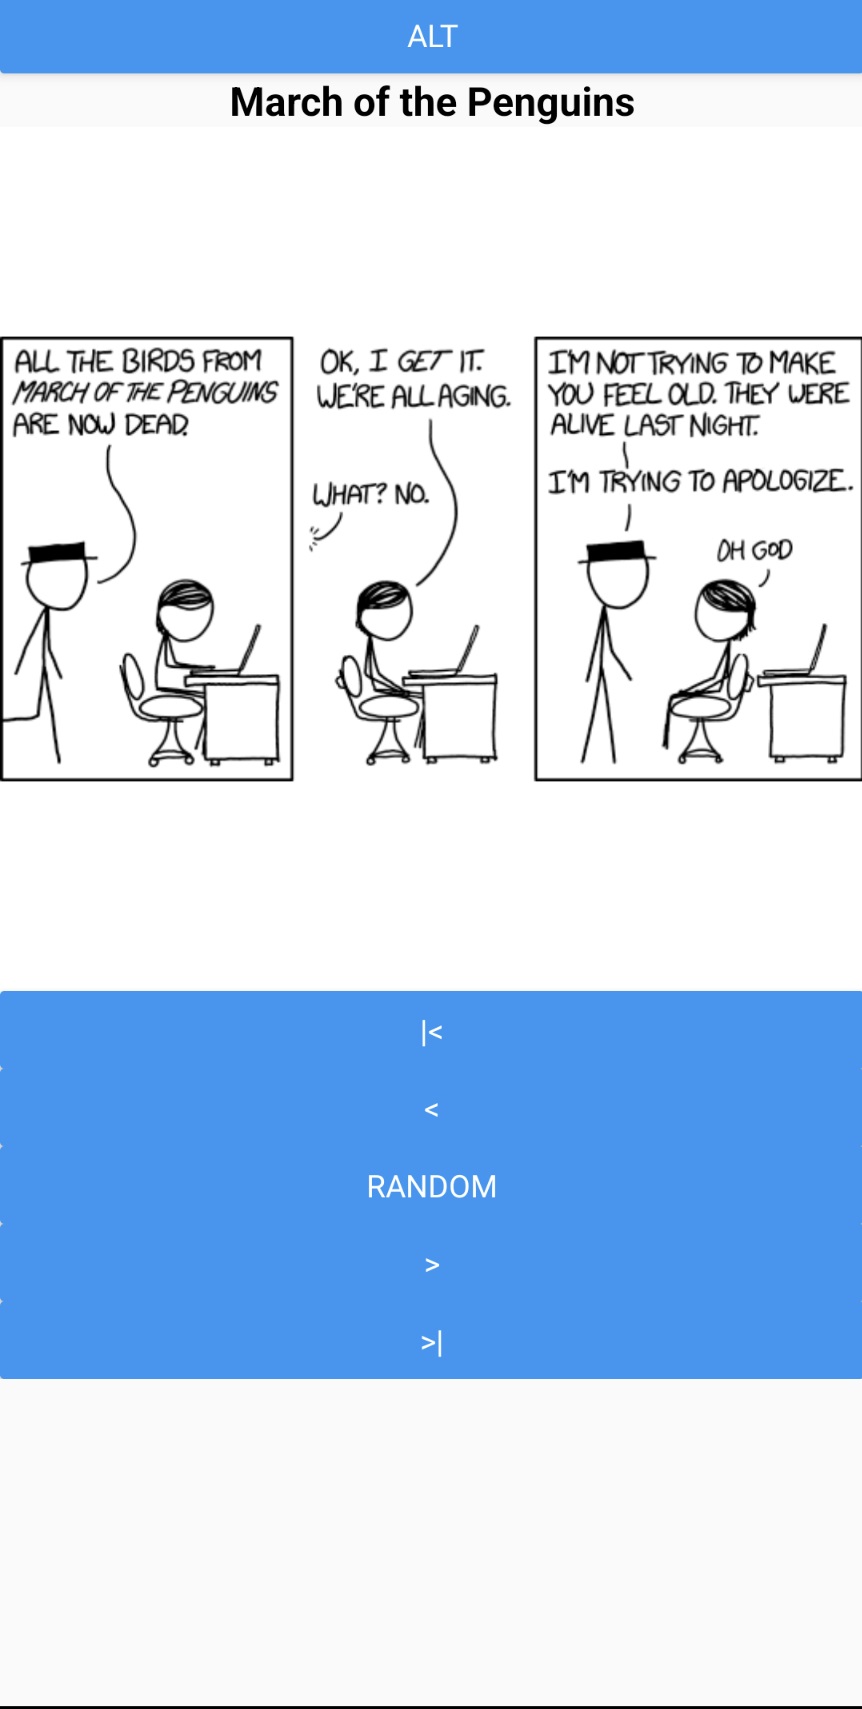 Android Version of the XKCD Reader App